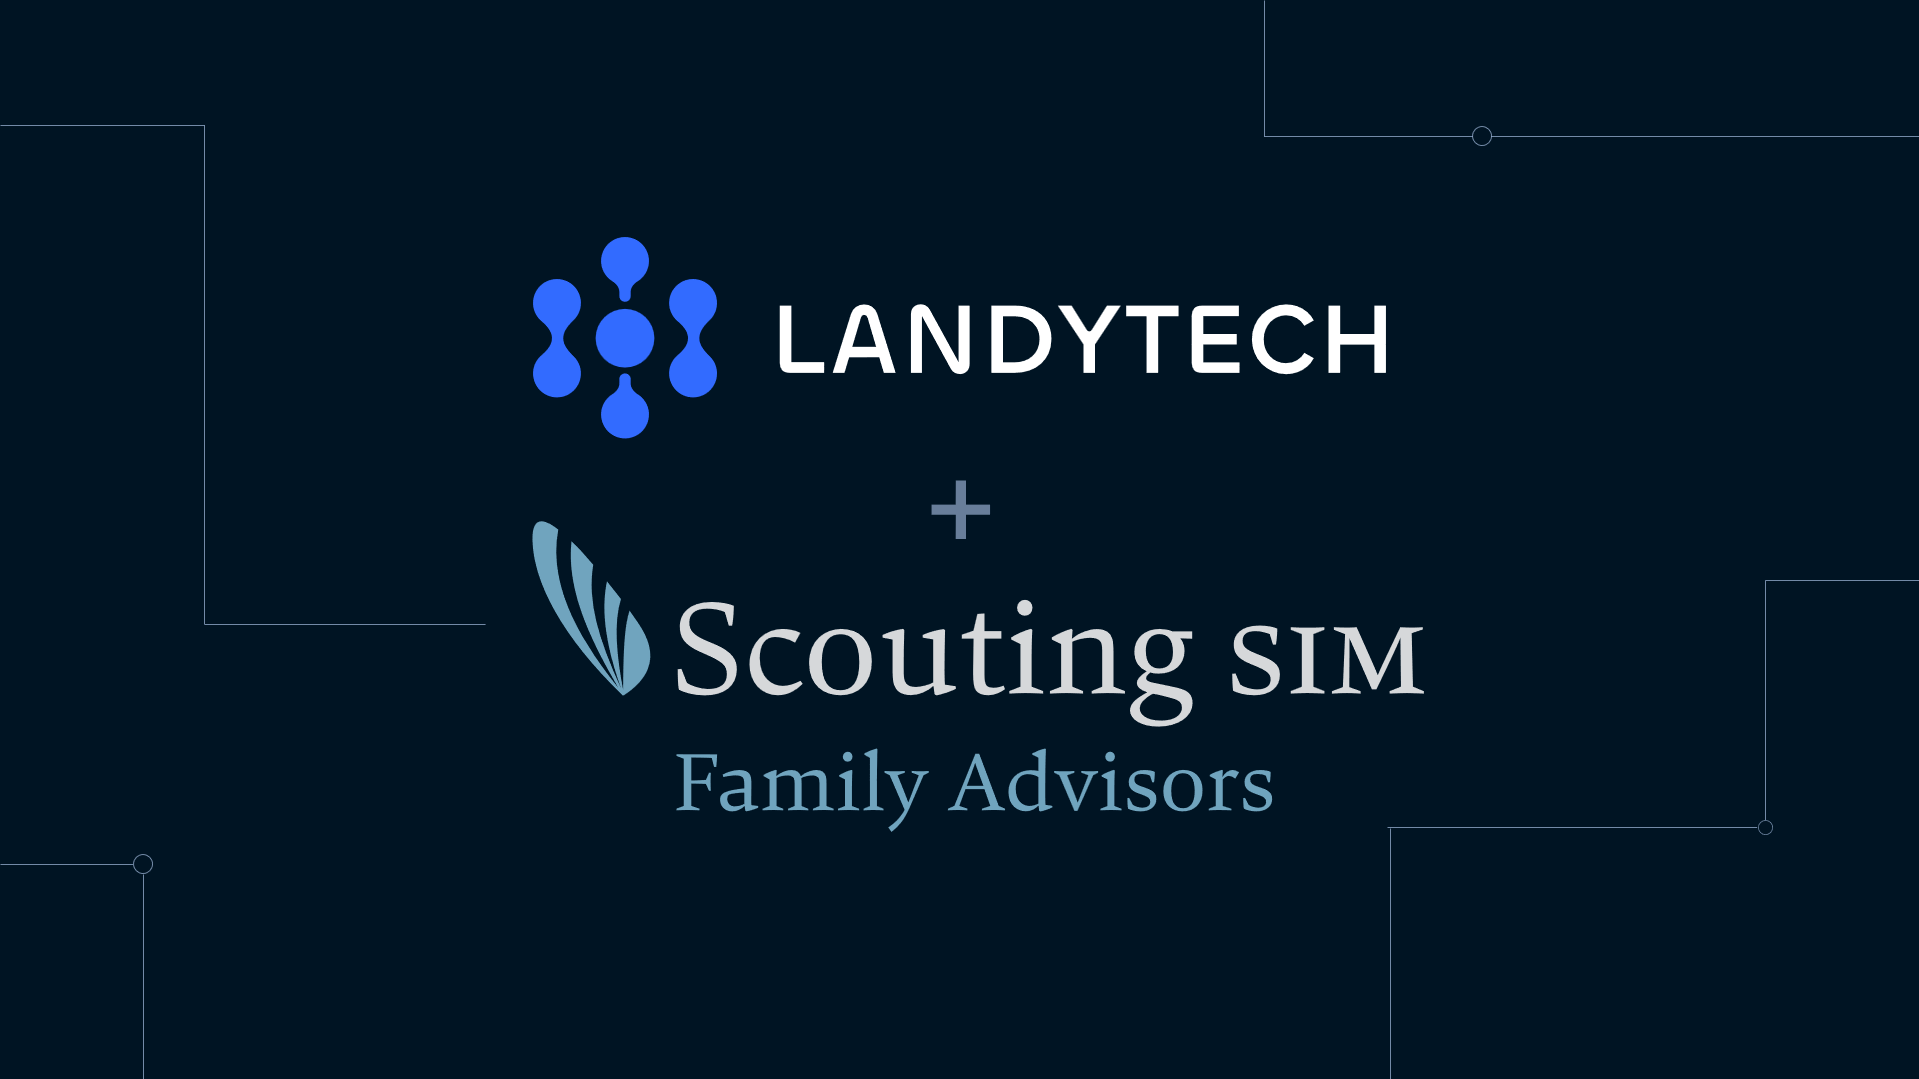 scouting_sim_family_advisors_partners_with_landytech_for_innovative_investment_management